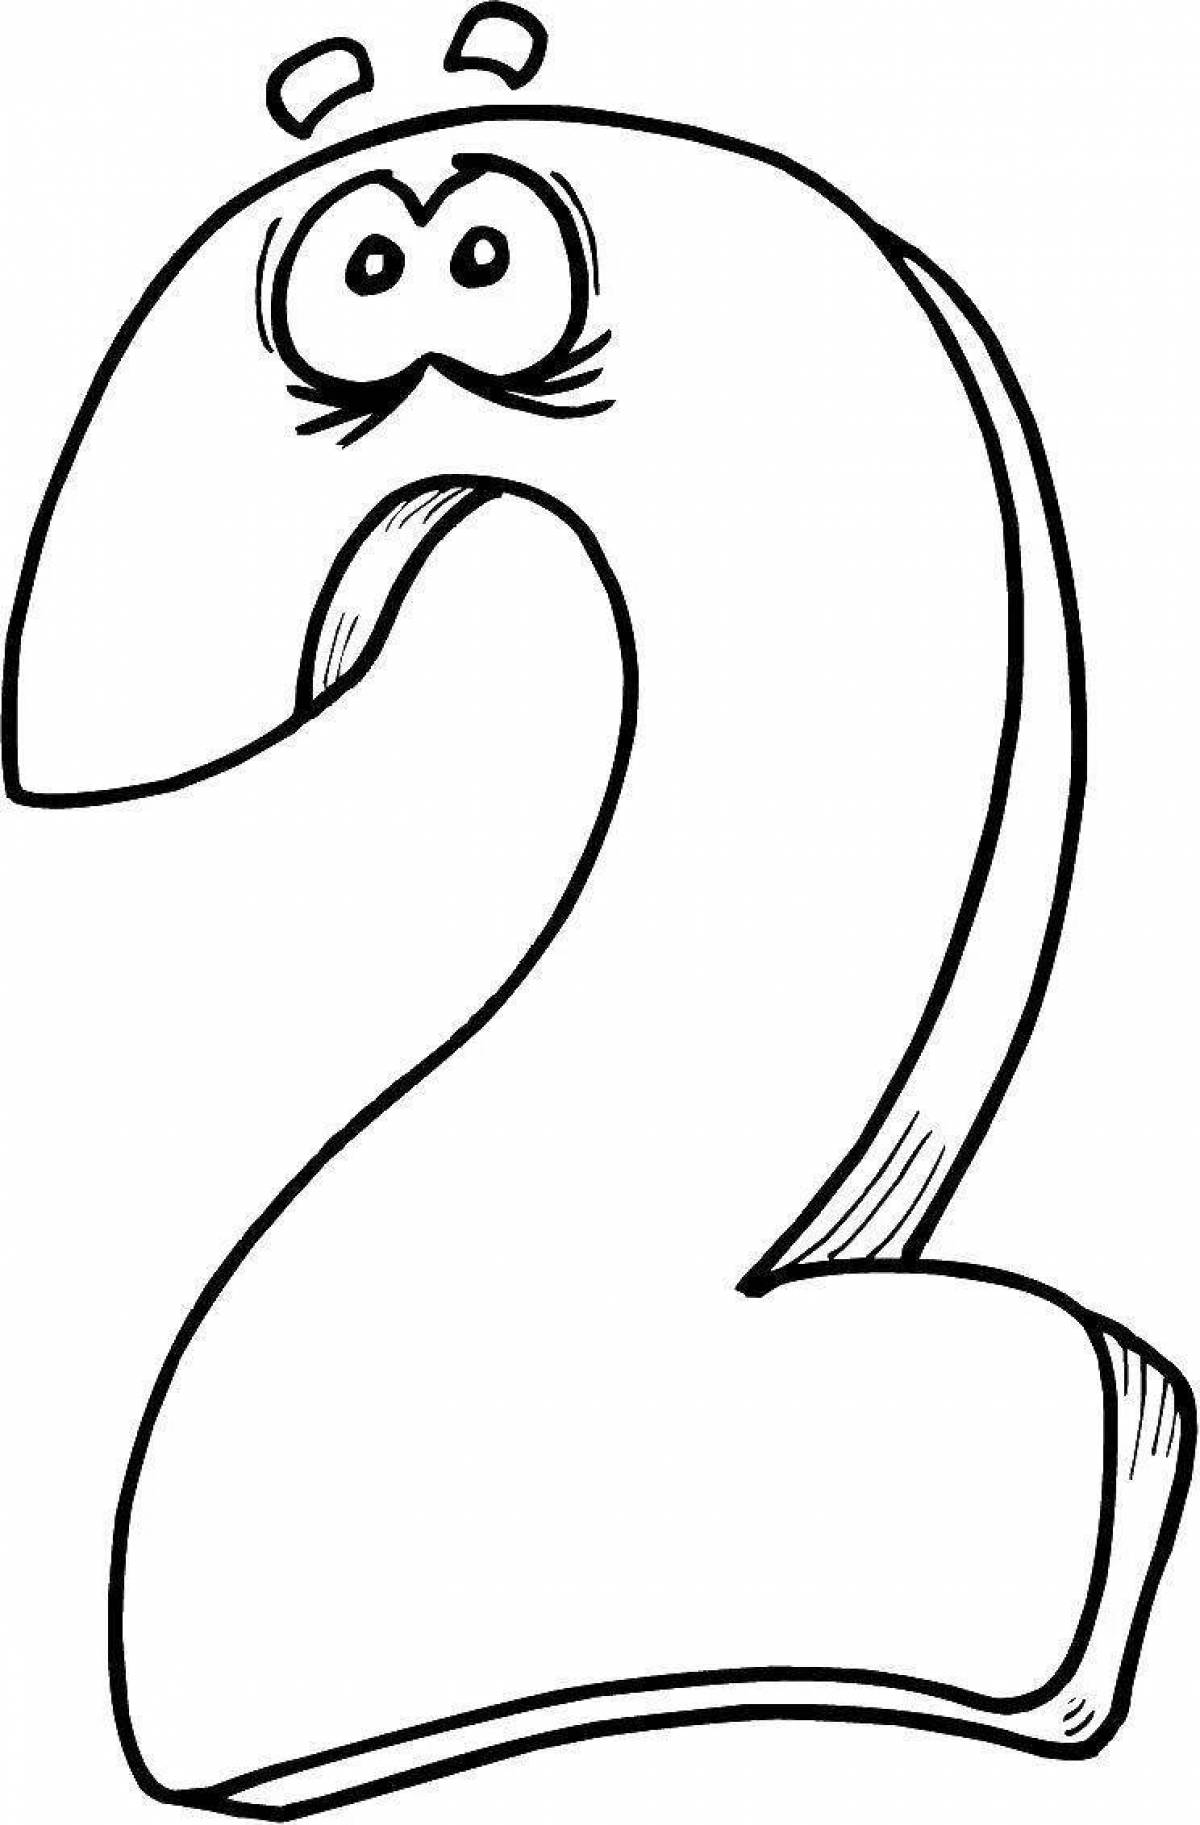 Radiant coloring page beautiful numbers